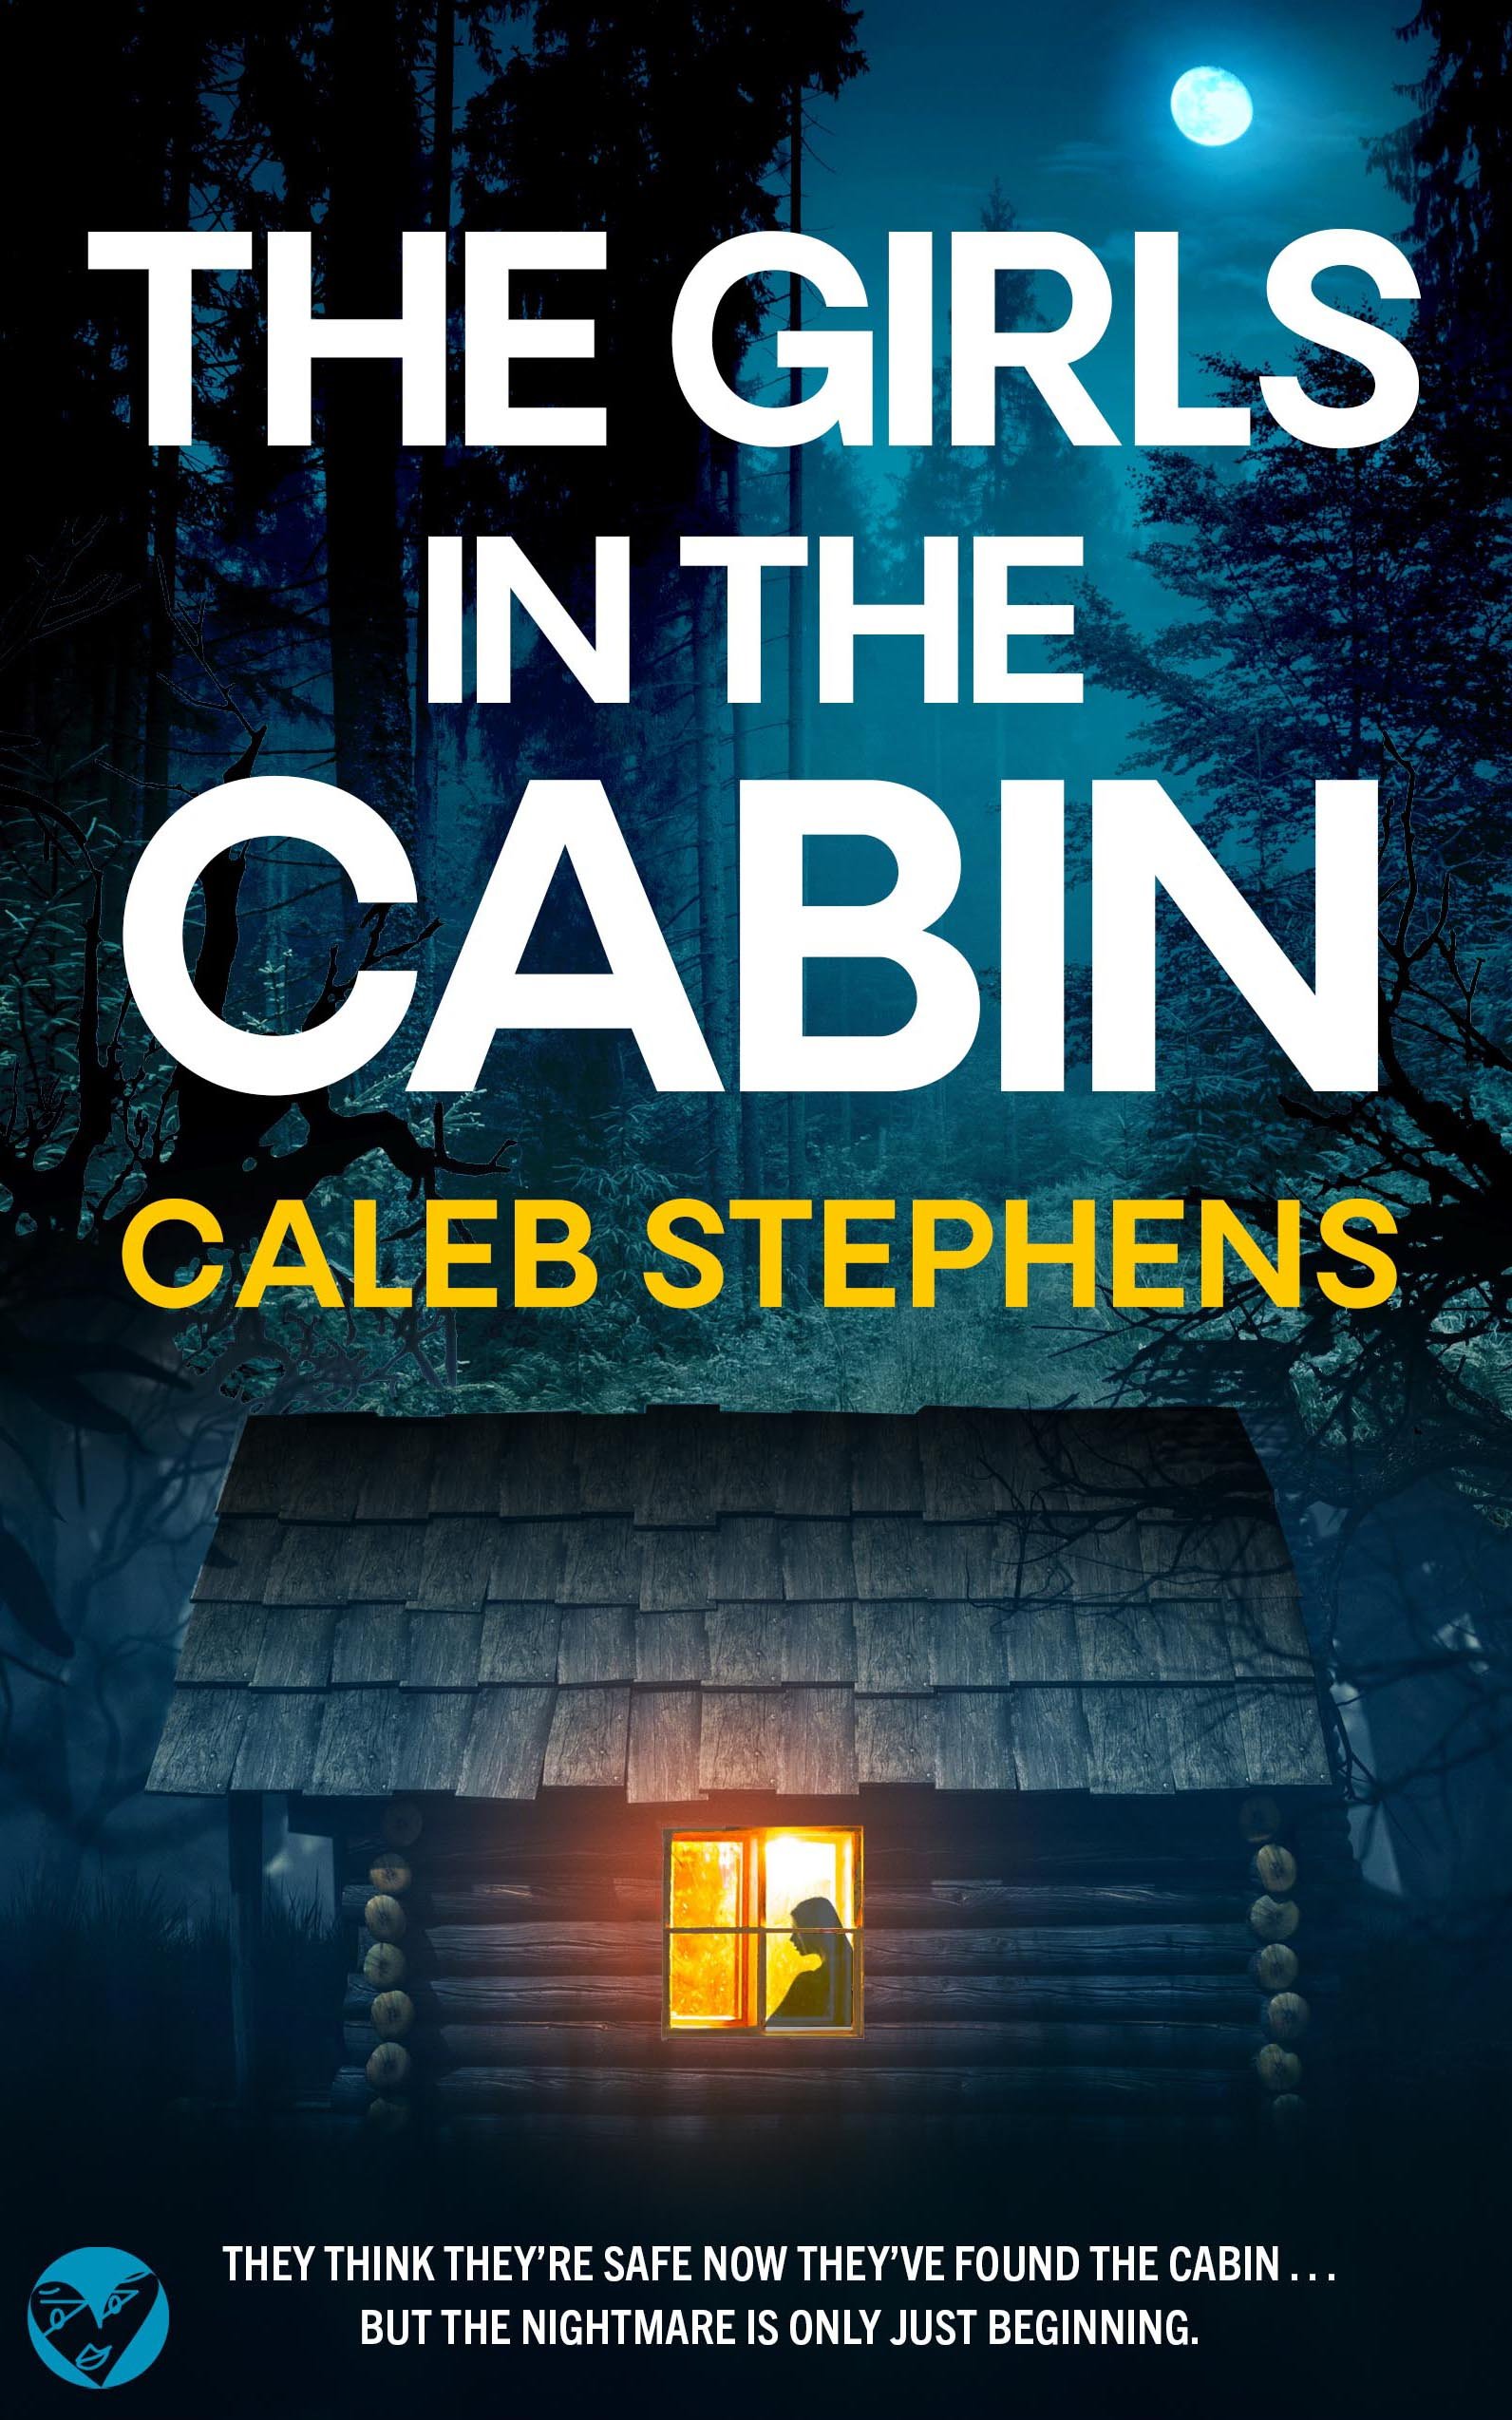 THE GIRLS IN THE CABIN Cover publish.jpg